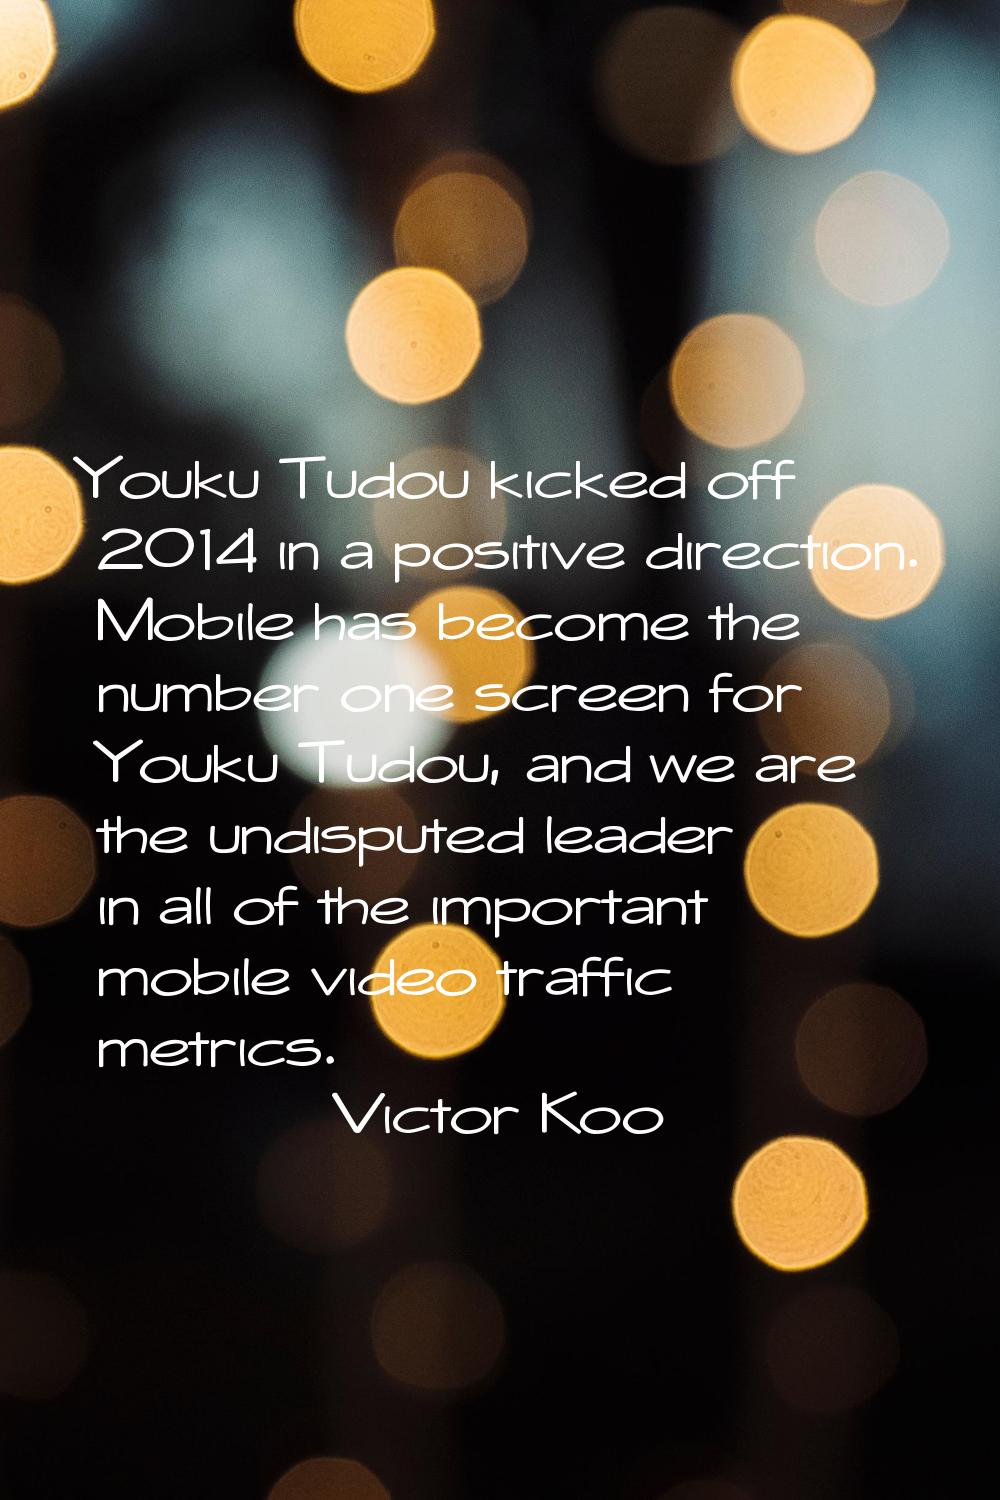 Youku Tudou kicked off 2014 in a positive direction. Mobile has become the number one screen for Yo